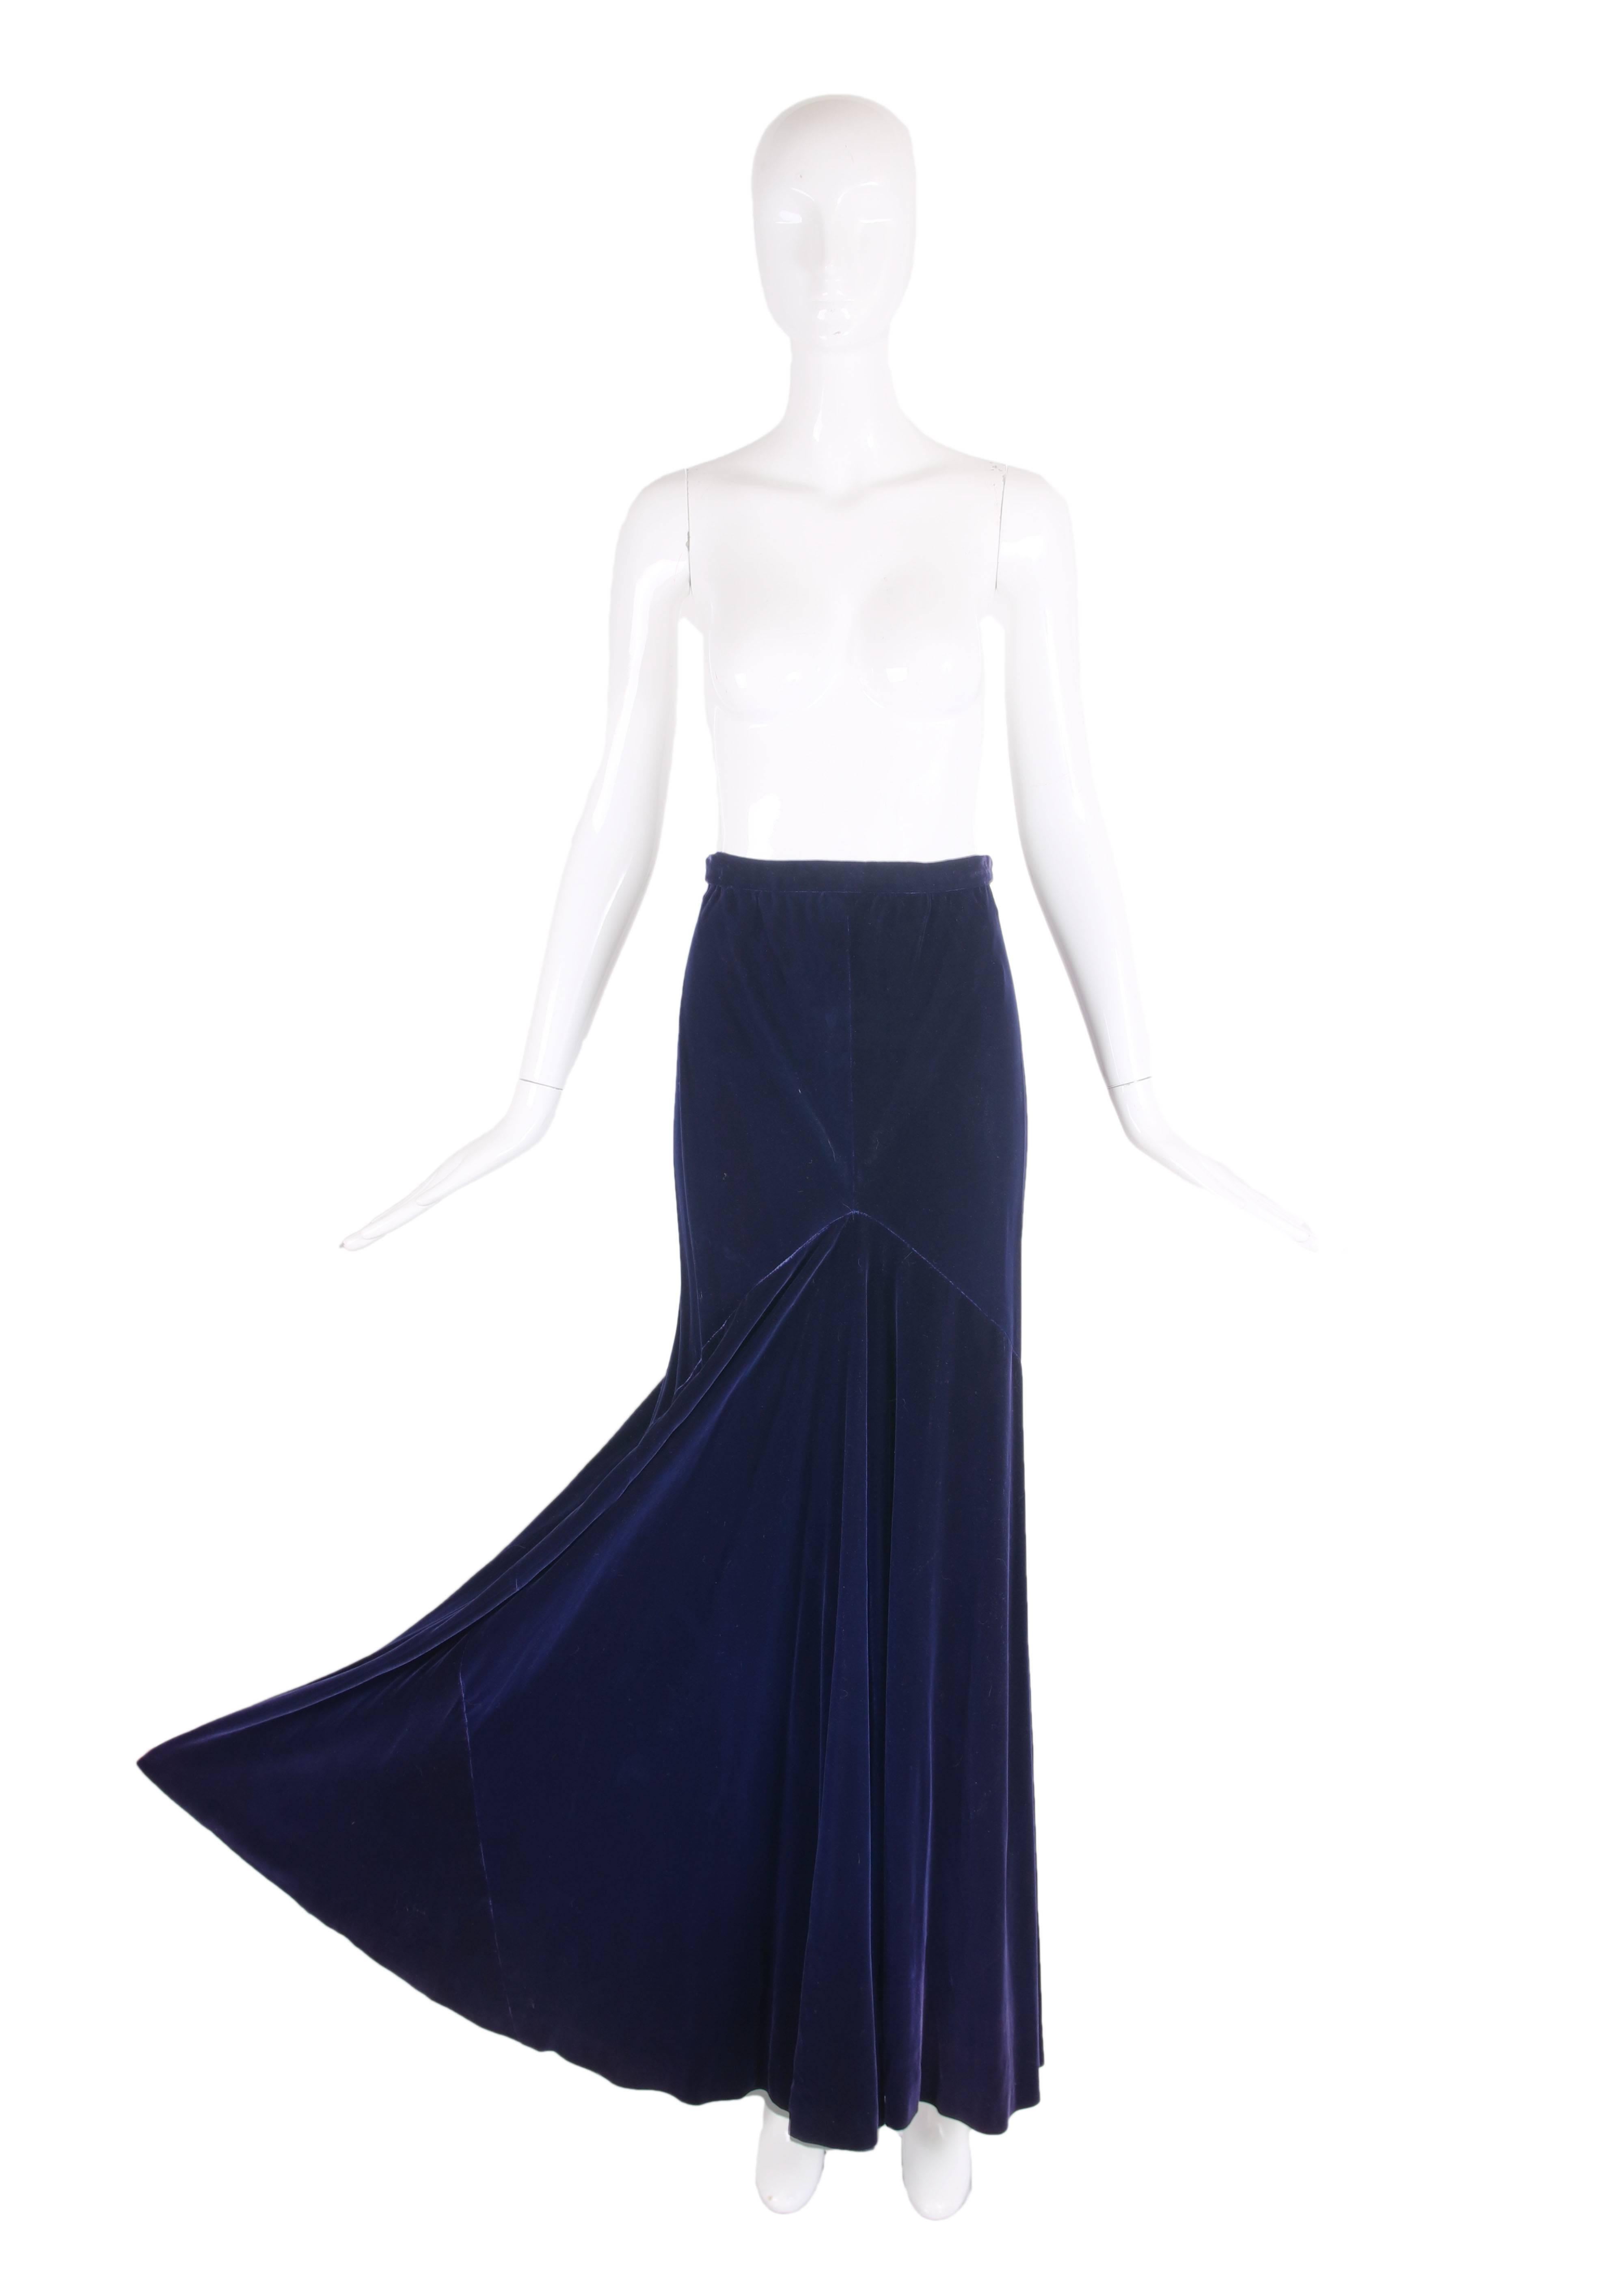 1970's Halston headstock deep royal blue velvet maxi skirt with blue silk interior lining. In excellent condition. No size tag, please see measurements.